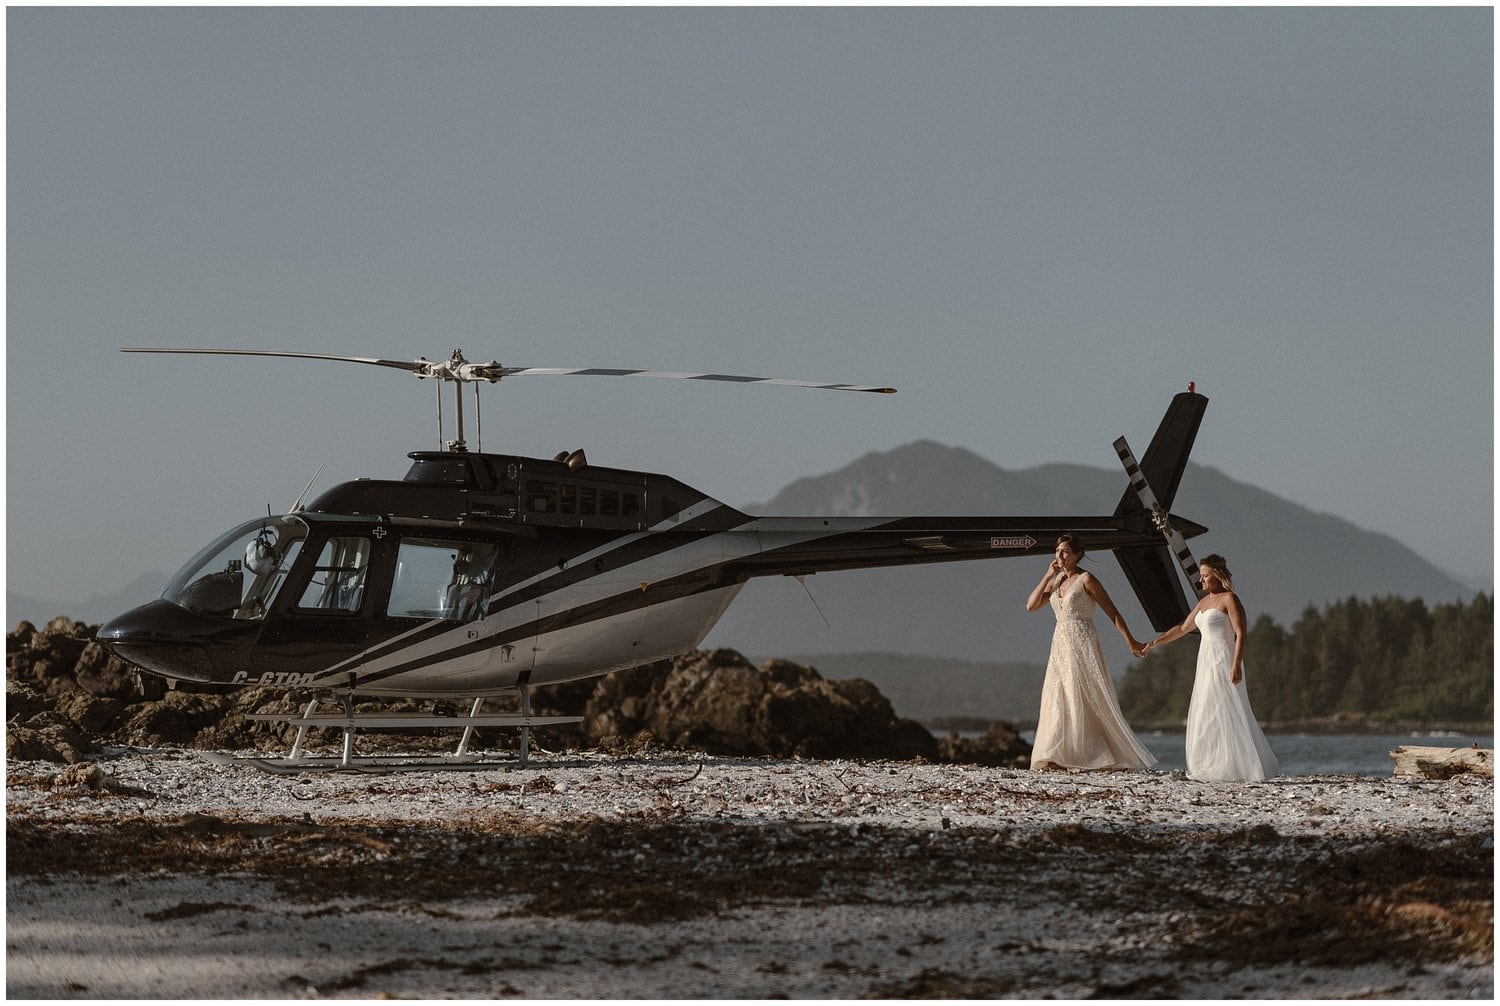 Two brides walk near a helicopter on their wedding day.